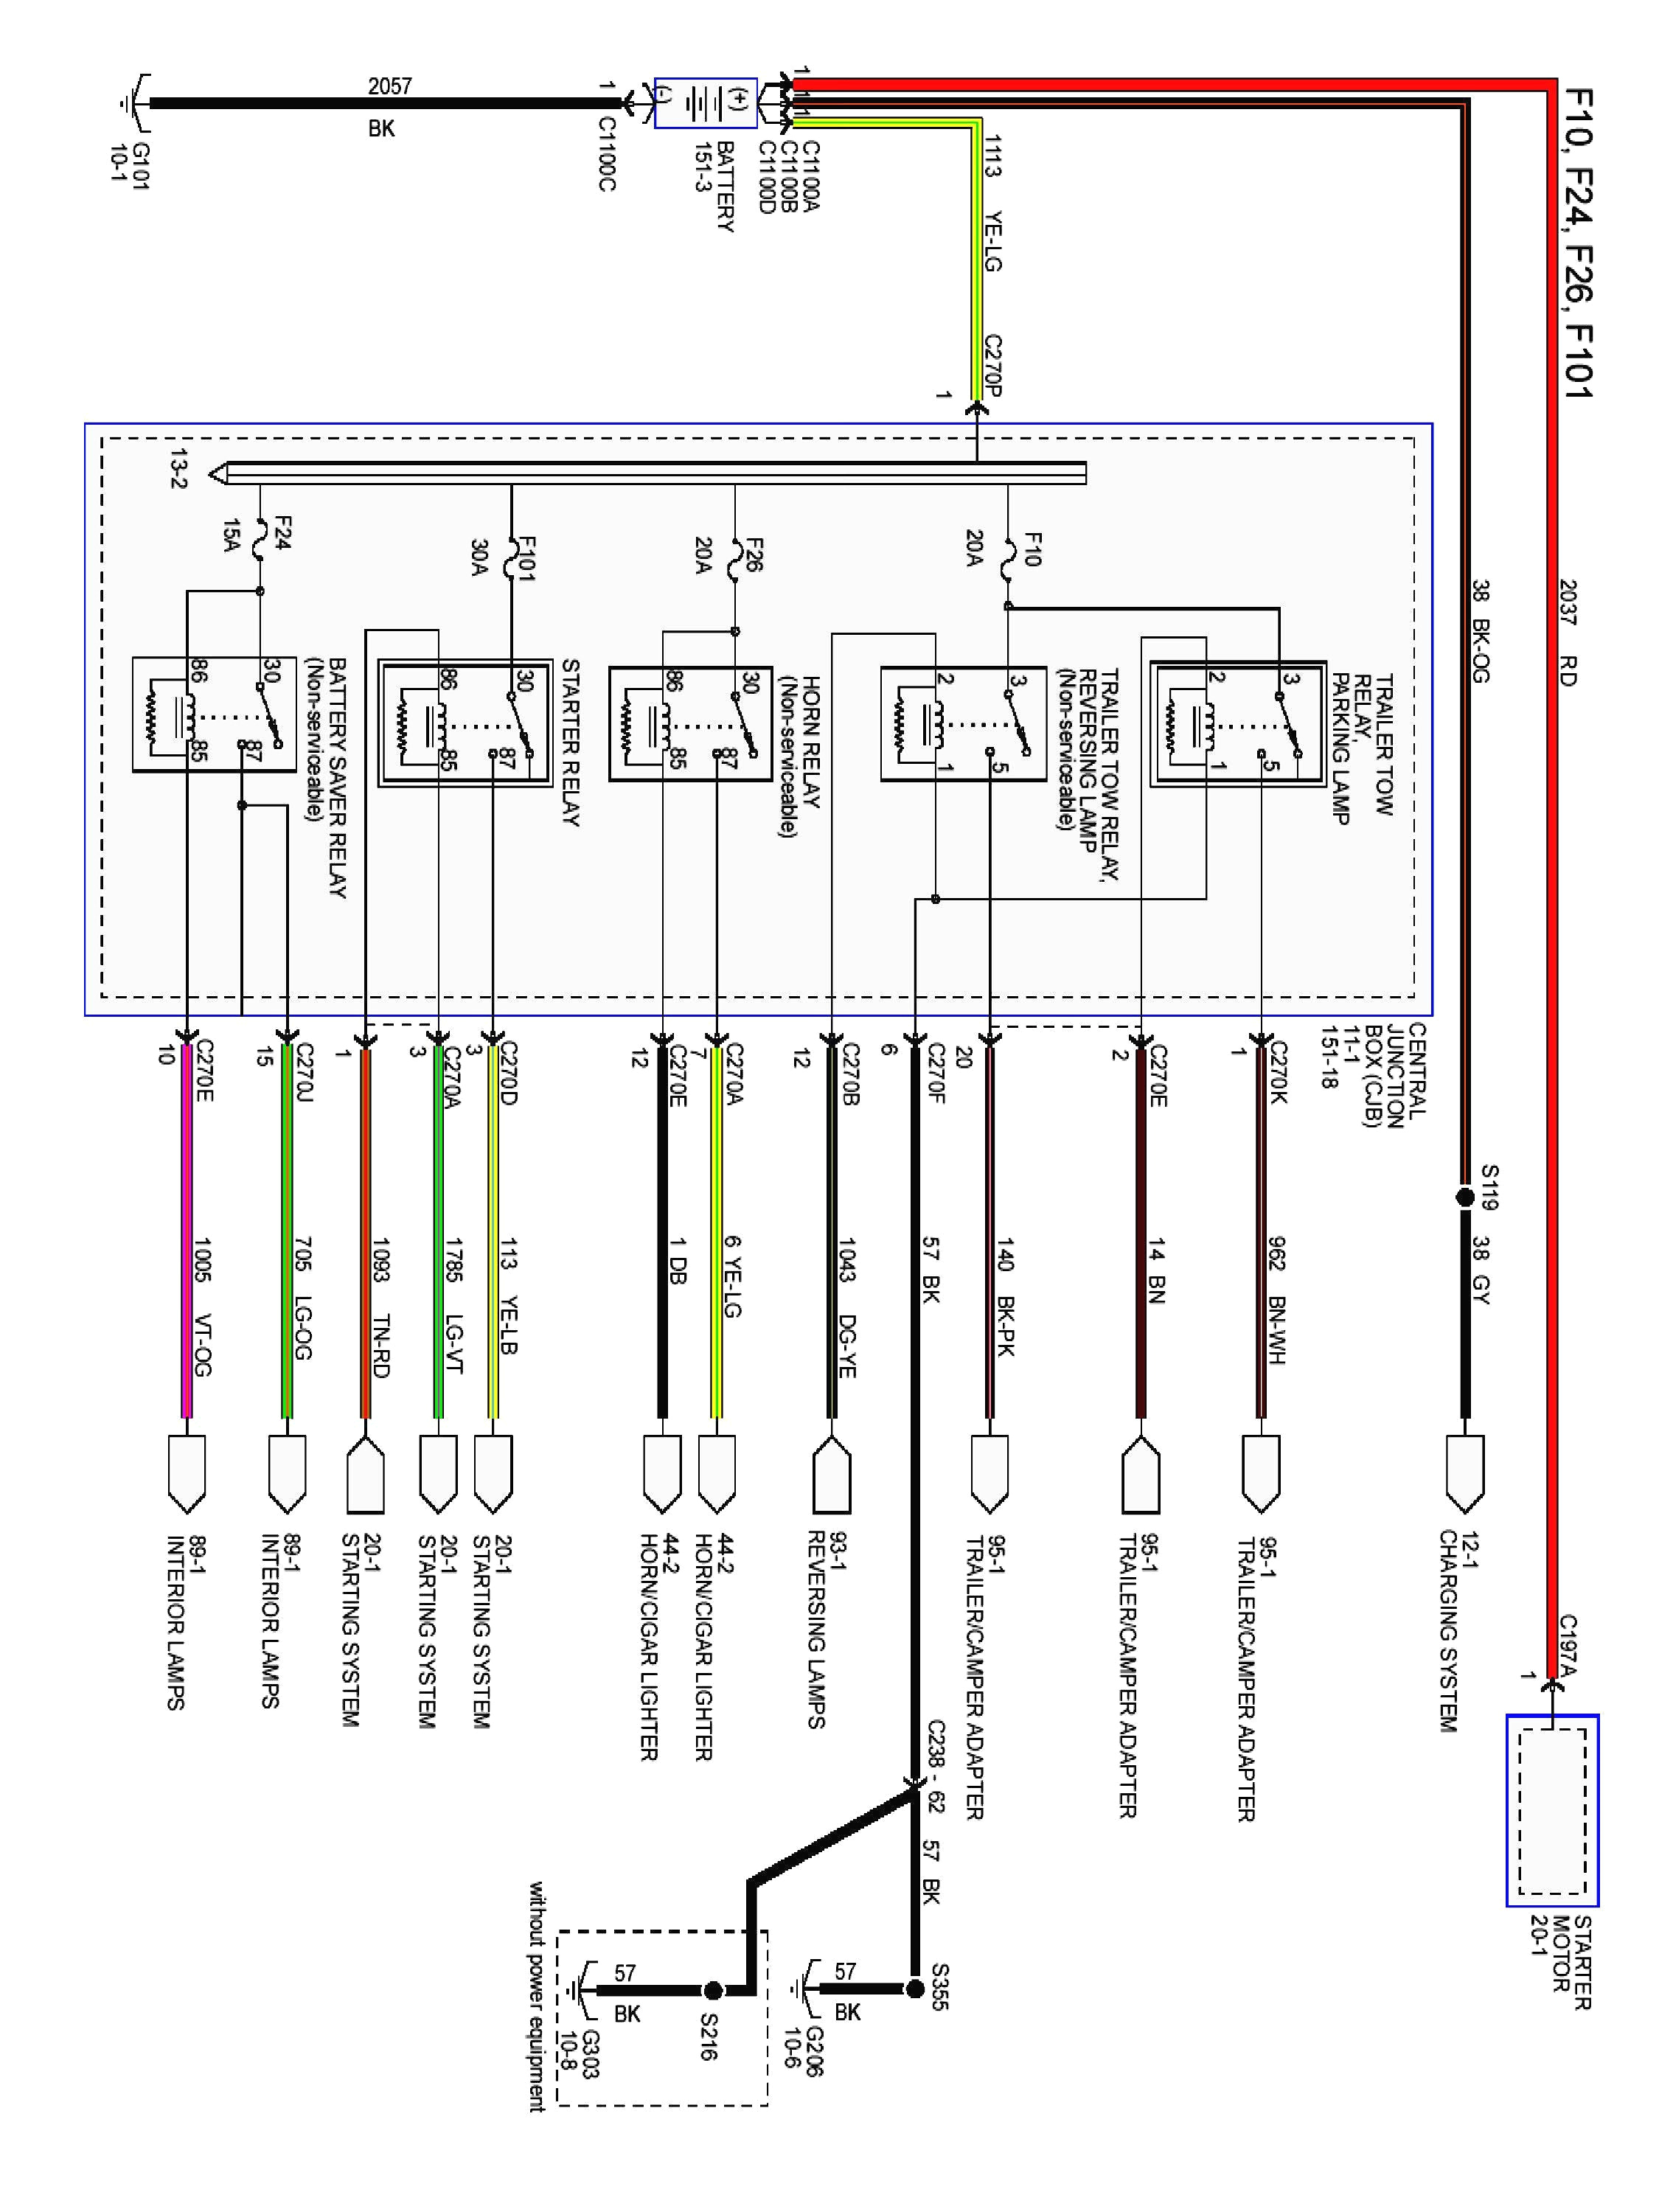 2006 ford f150 wiring diagram reverse wiring diagram view 2006 ford f 150 wiring harness diagram